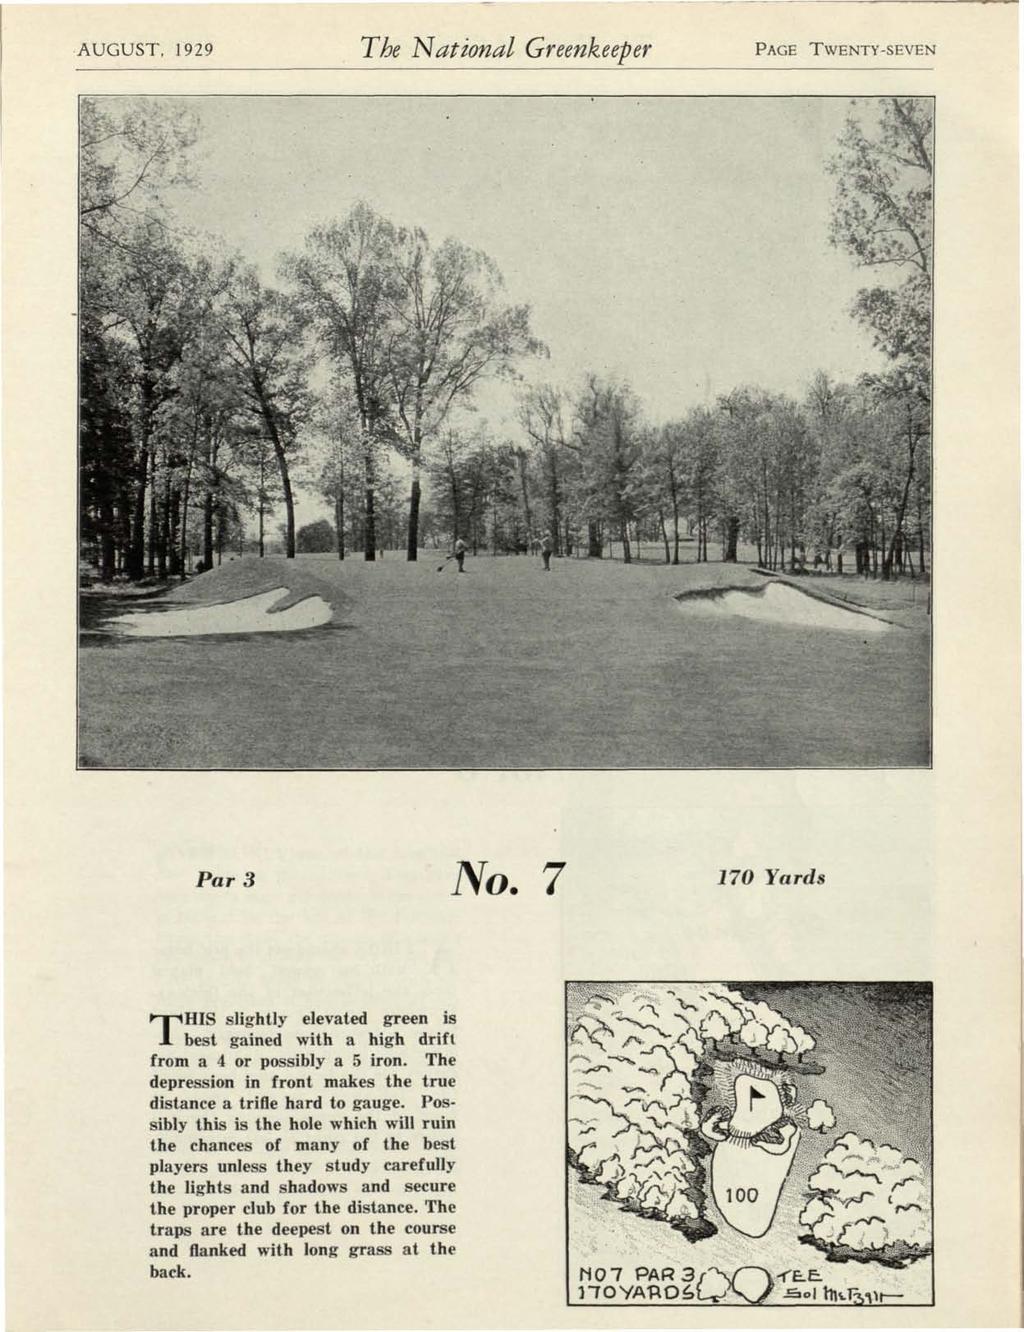 AUGUST, 1929 The National Greenkeeper PAGE TWENTY-SEVEN Par 3 No. 7 170 Yards THIS slightly elevated green is best gained with a high drift from a 4 or possibly a 5 iron.